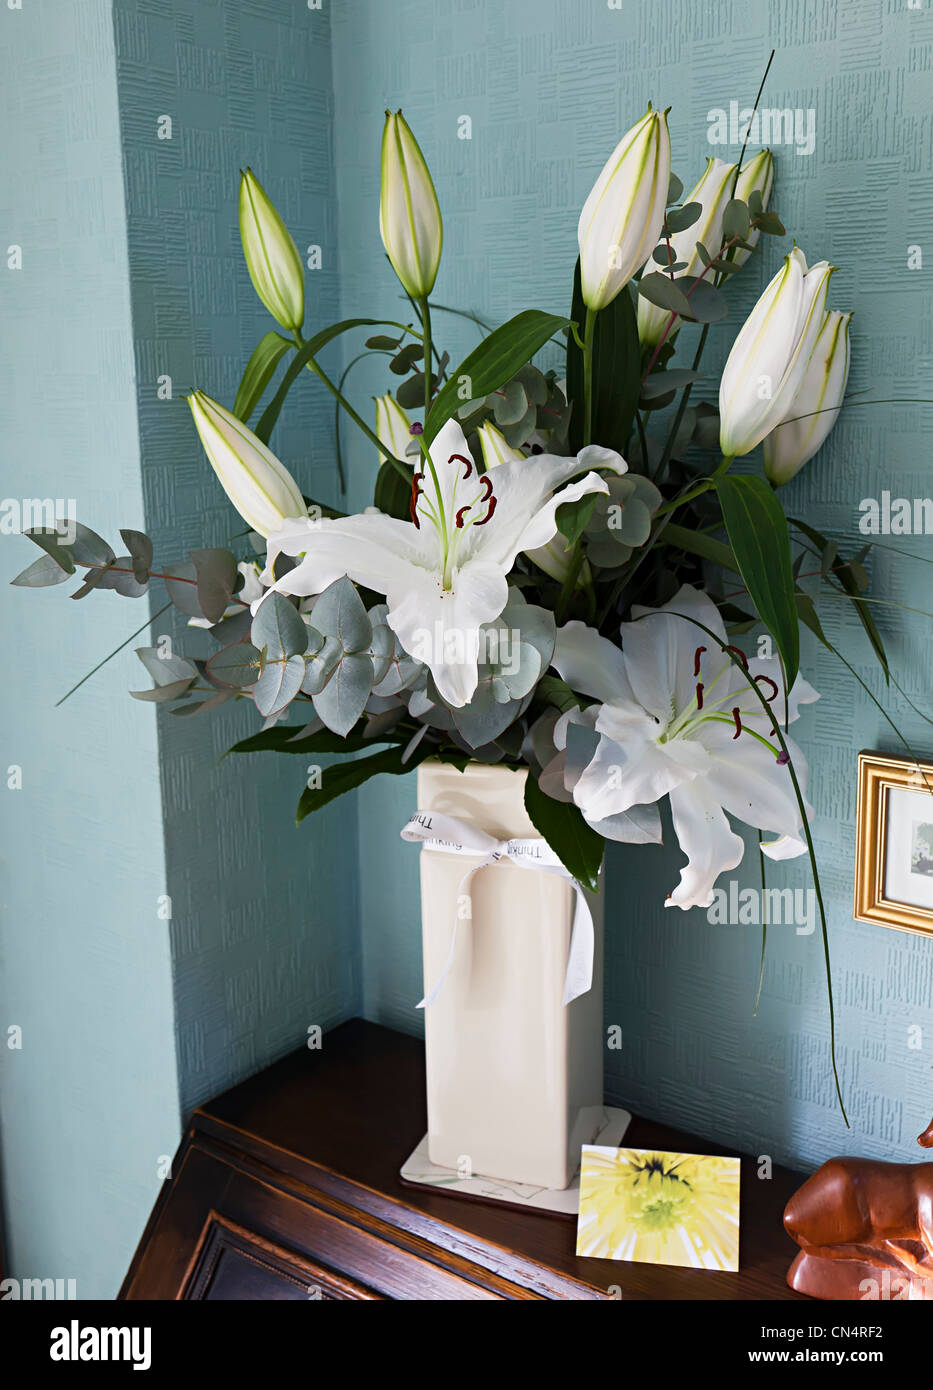 White lillies in vase as condolences following bereavement, Wales, UK Stock Photo